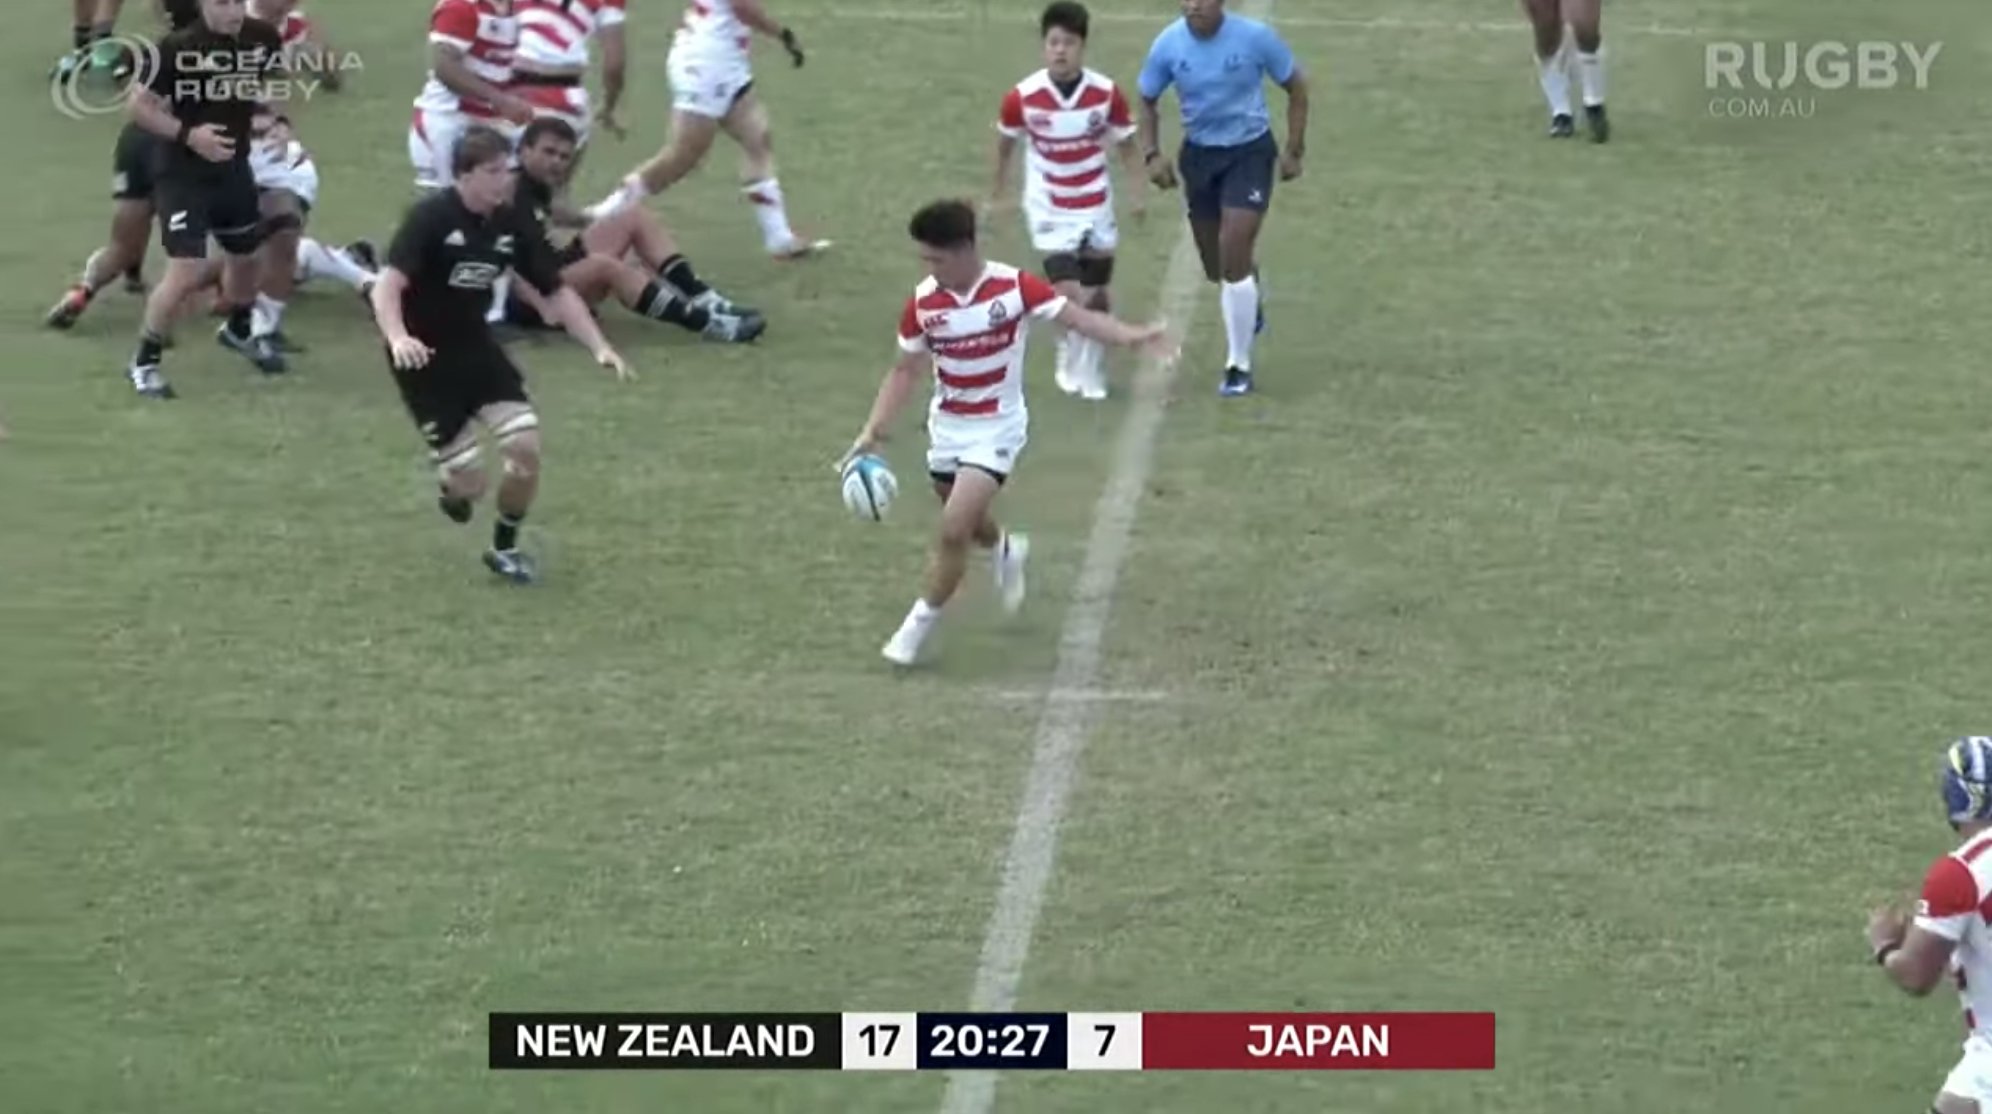 WATCH: Japan U20's carve up New Zealand with some of the best football skills we've ever seen